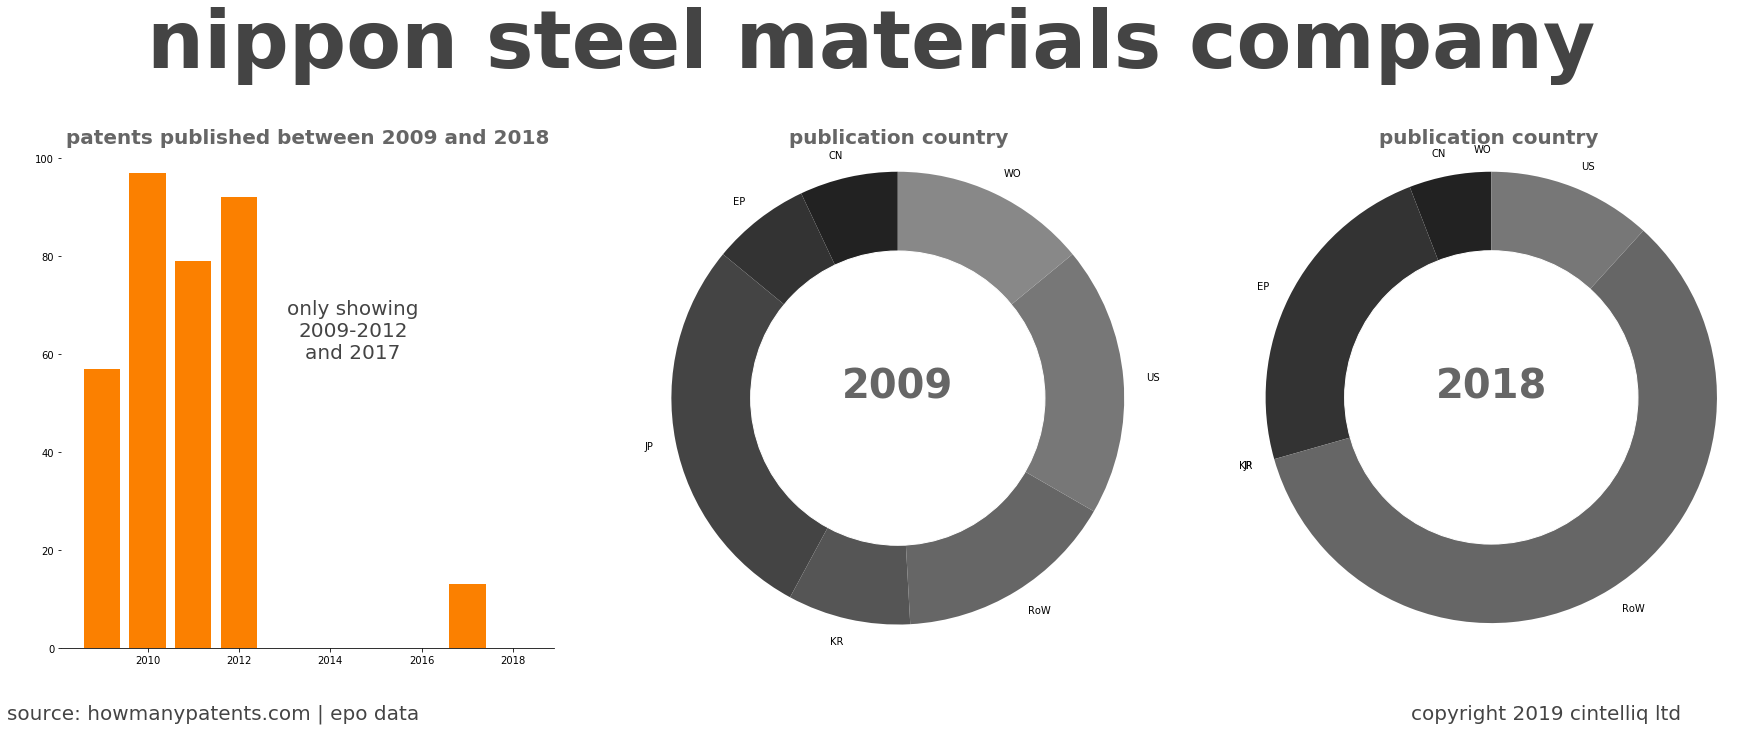 summary of patents for Nippon Steel Materials Company